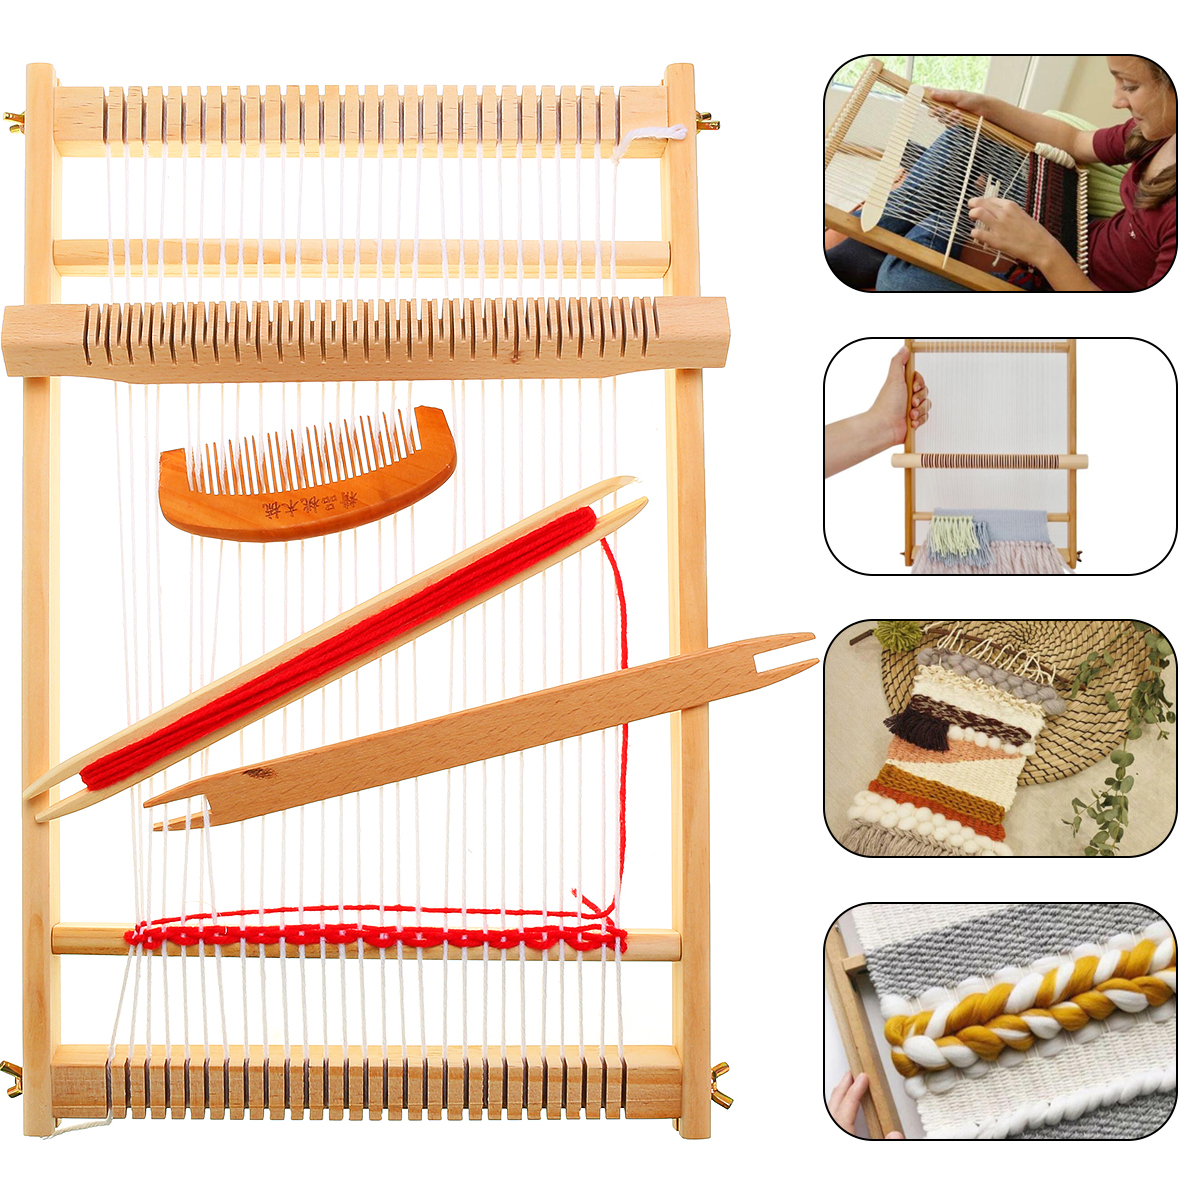 

DIY Traditional Wooden Weaving Loom Machine Pretend Play Toys Kids Knitting Craft